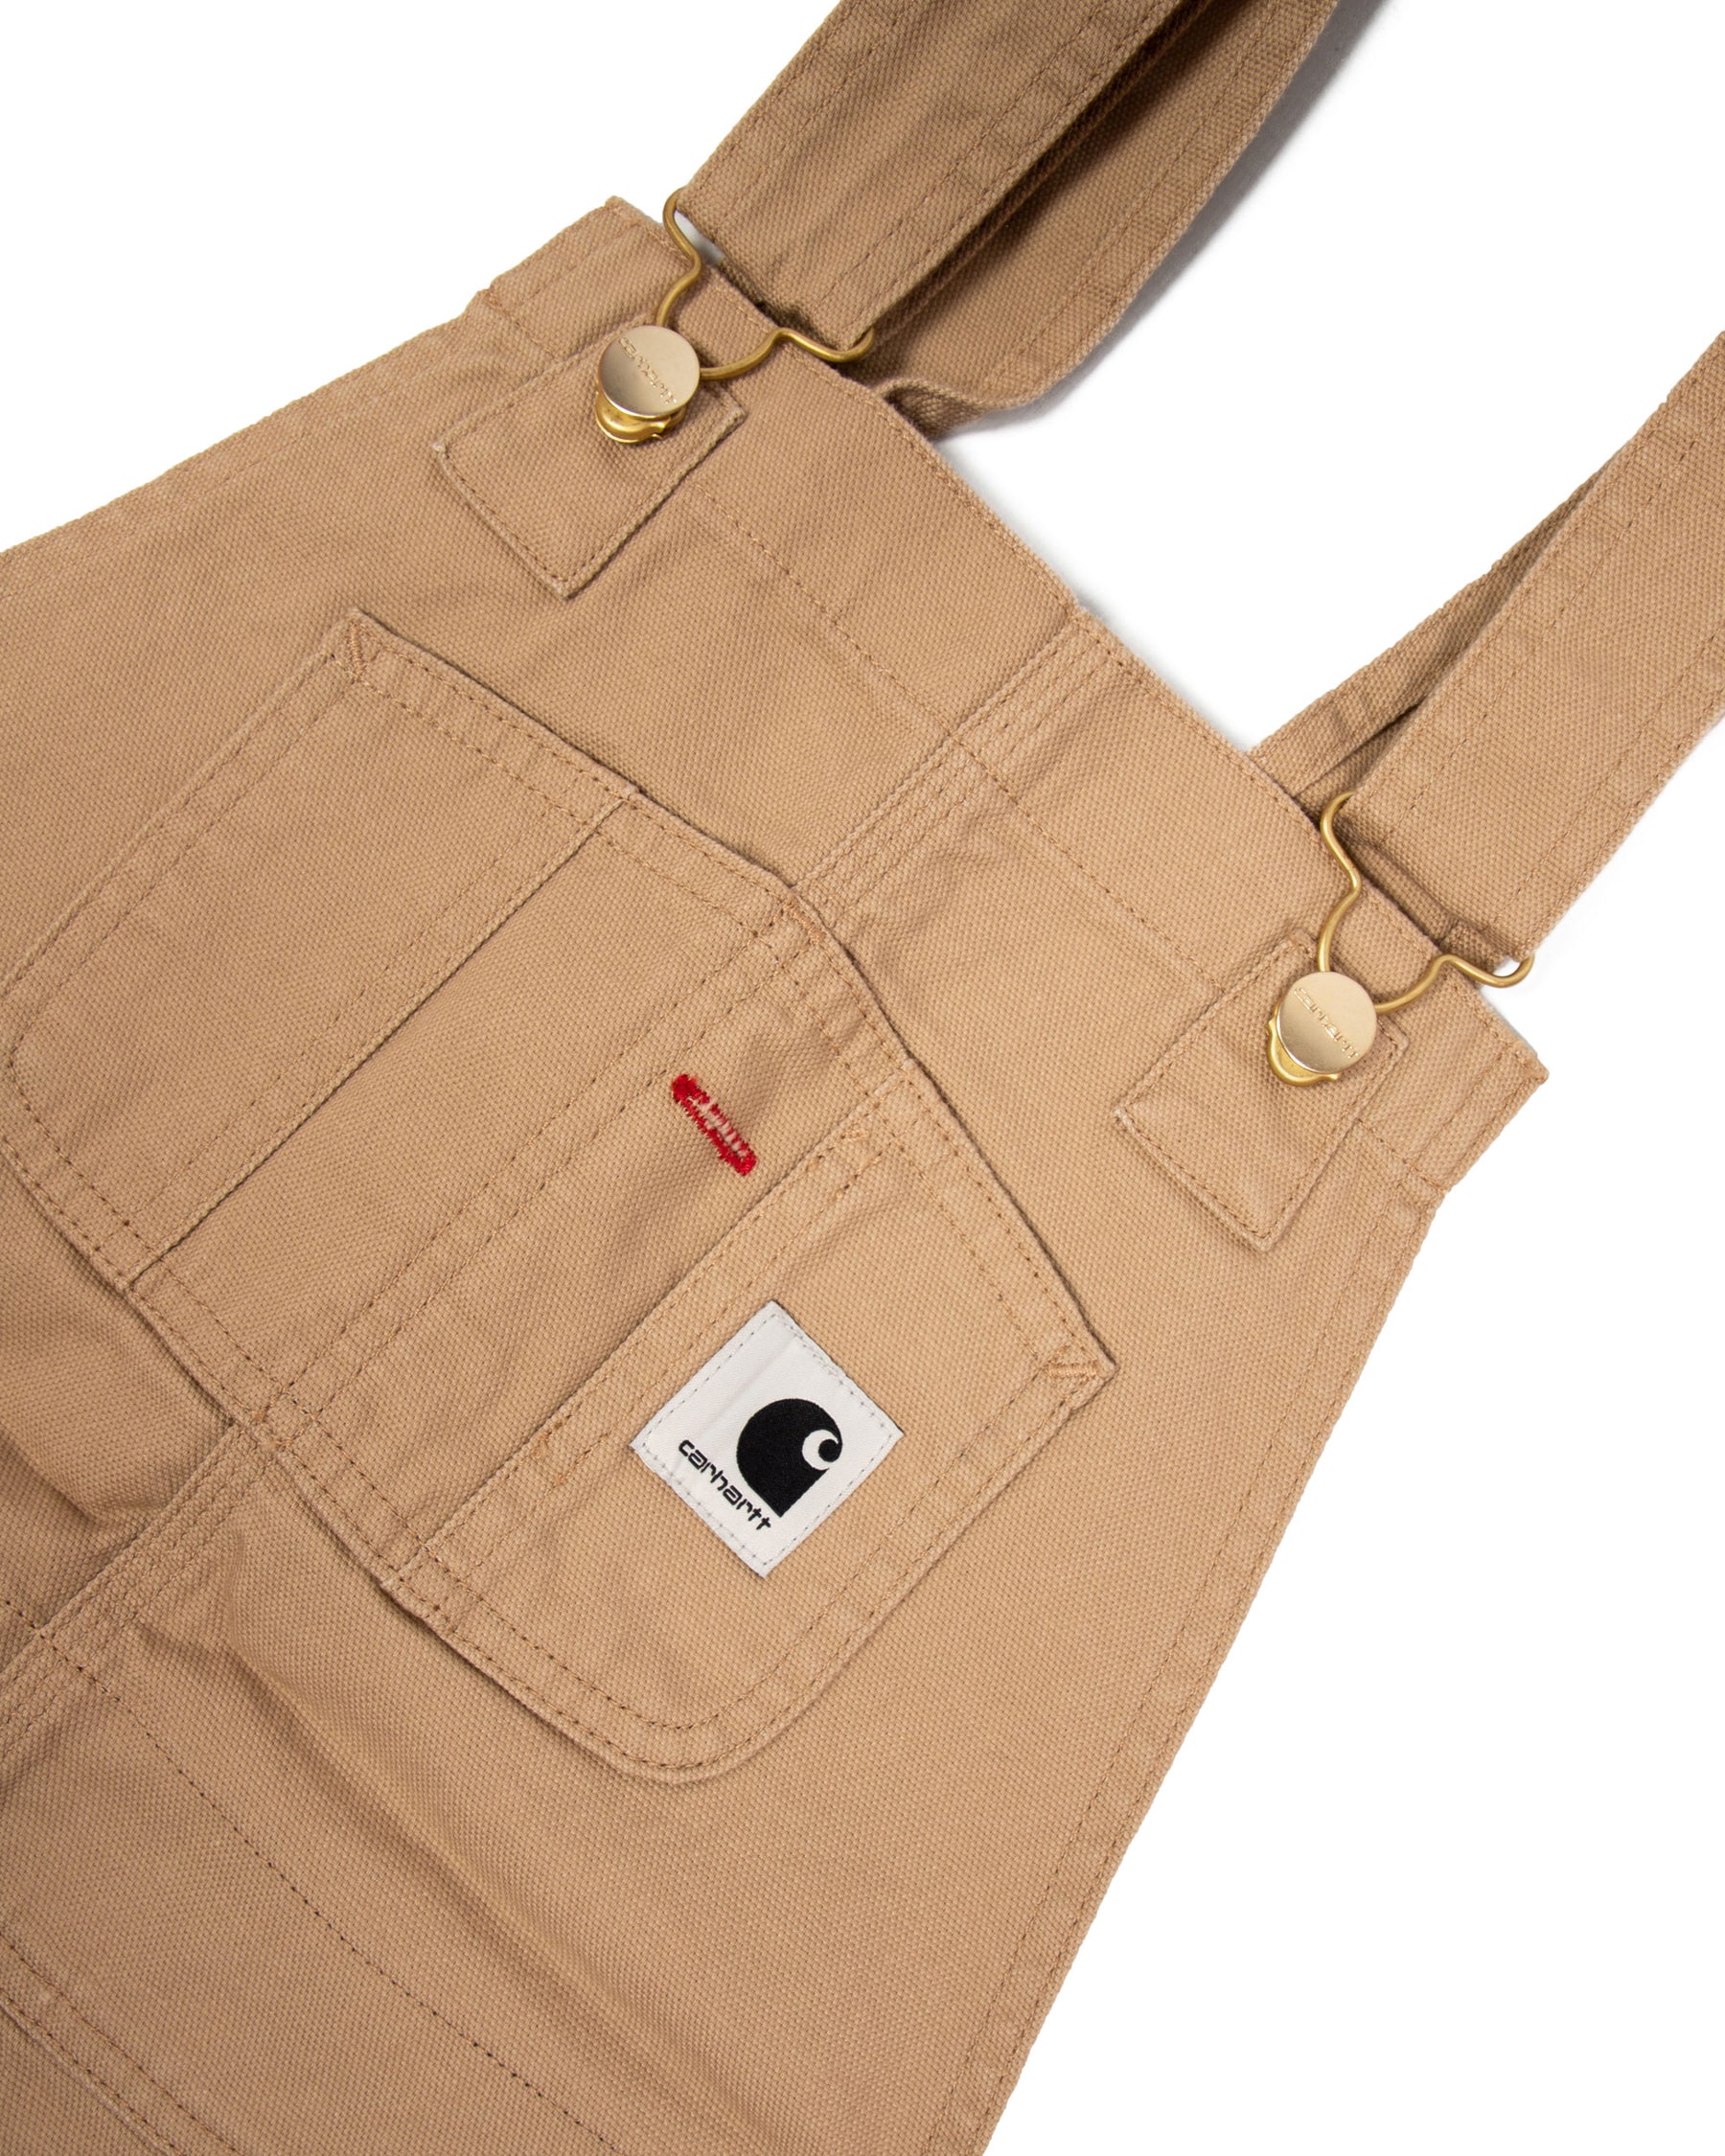 Bib Overall Dungarees Dusty Brown I028634-07E02